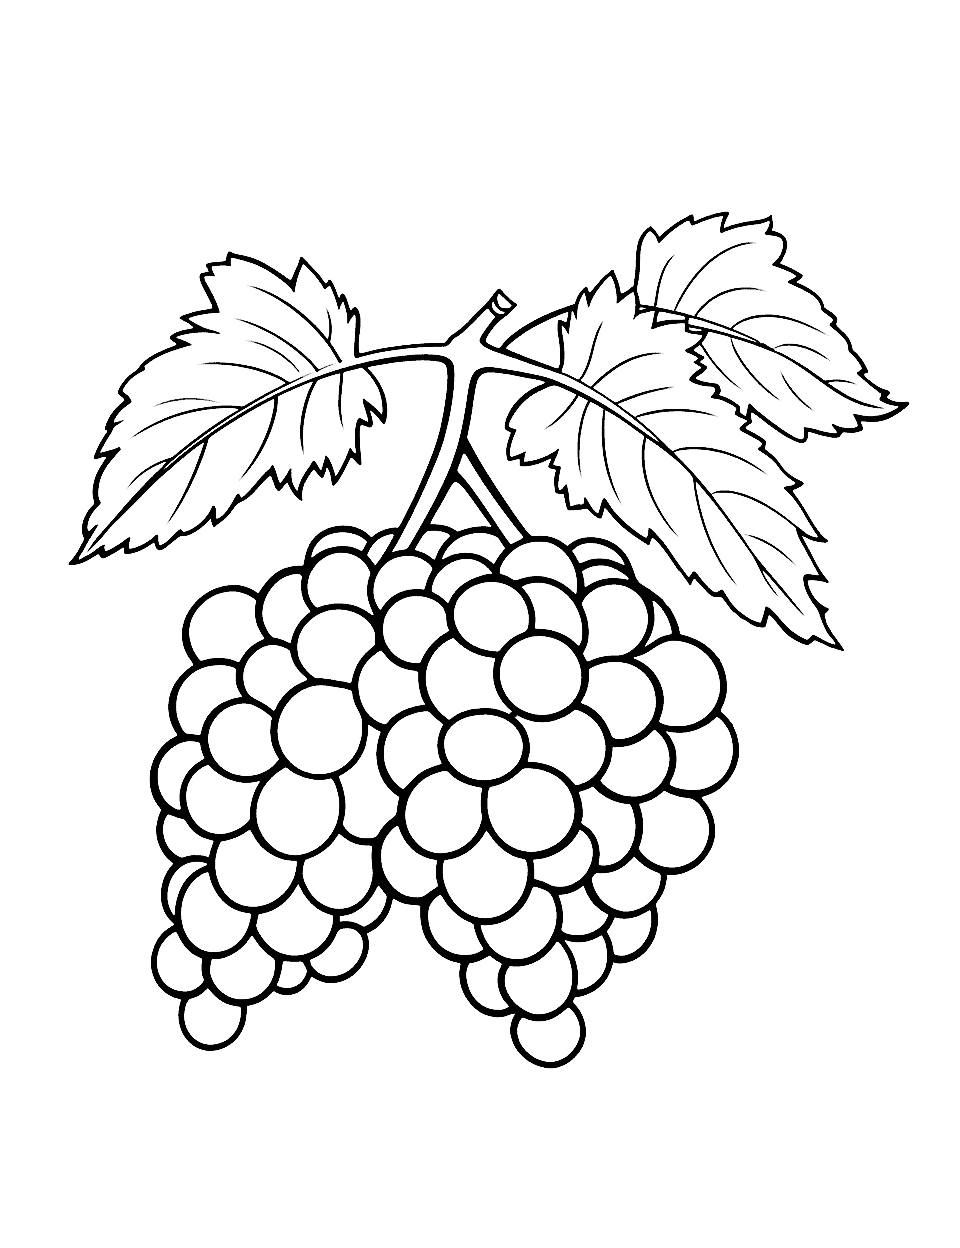 Grapes on the Vine Fruit Coloring Page - A bunch of grapes hanging from a vine.